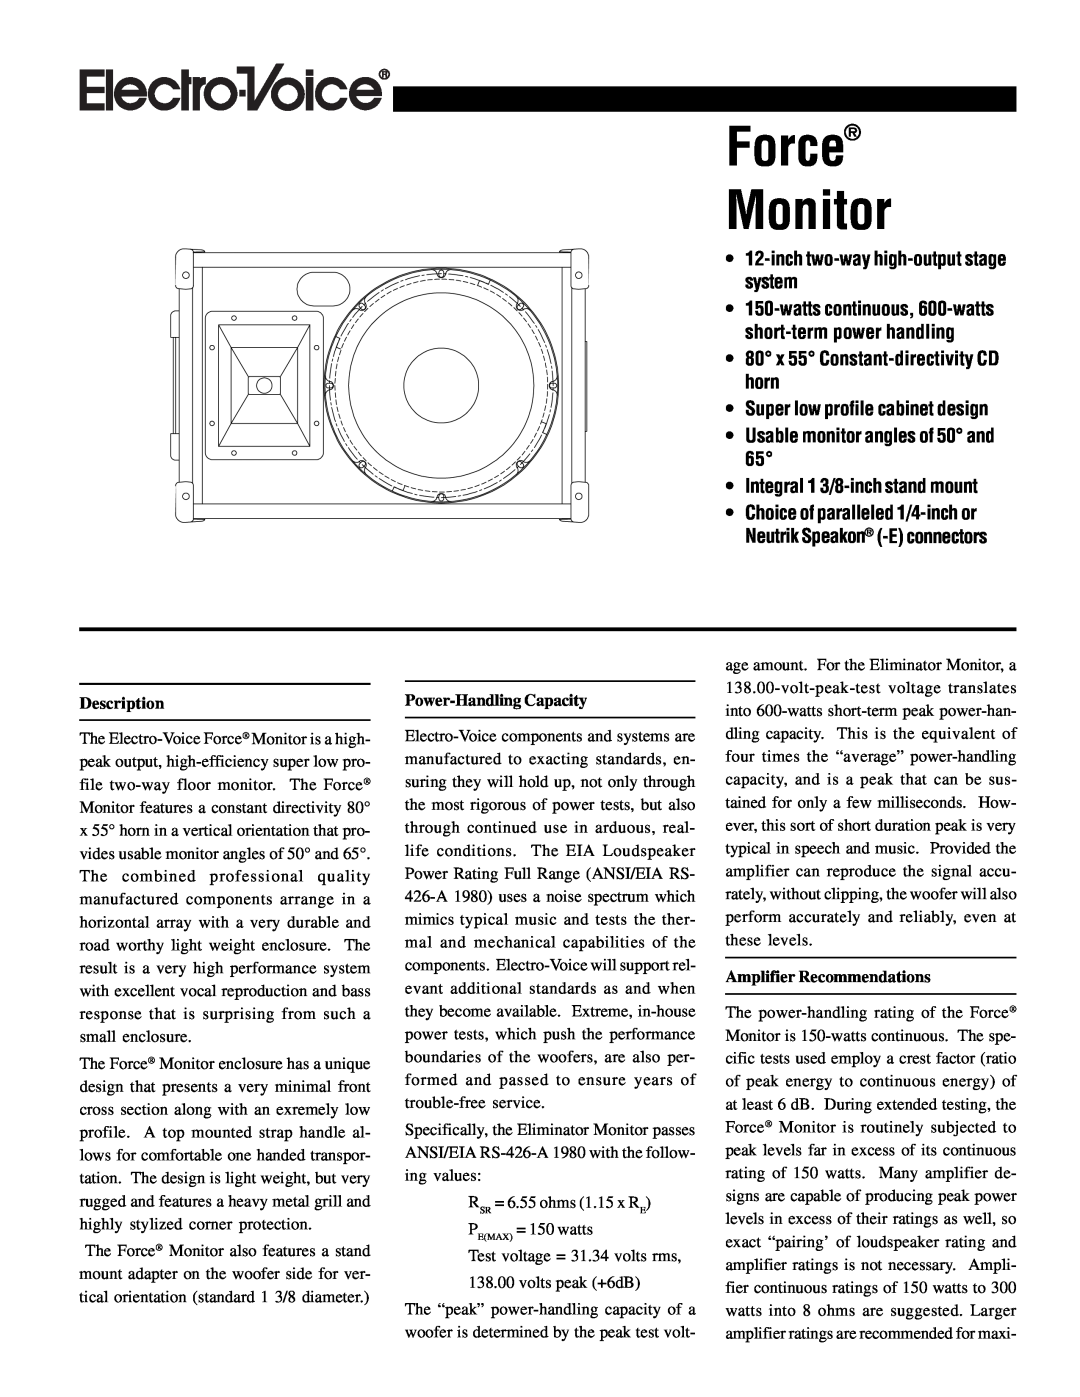 Electro-Voice Computer Monitor manual Force Monitor, inch two-way high-output stage system 